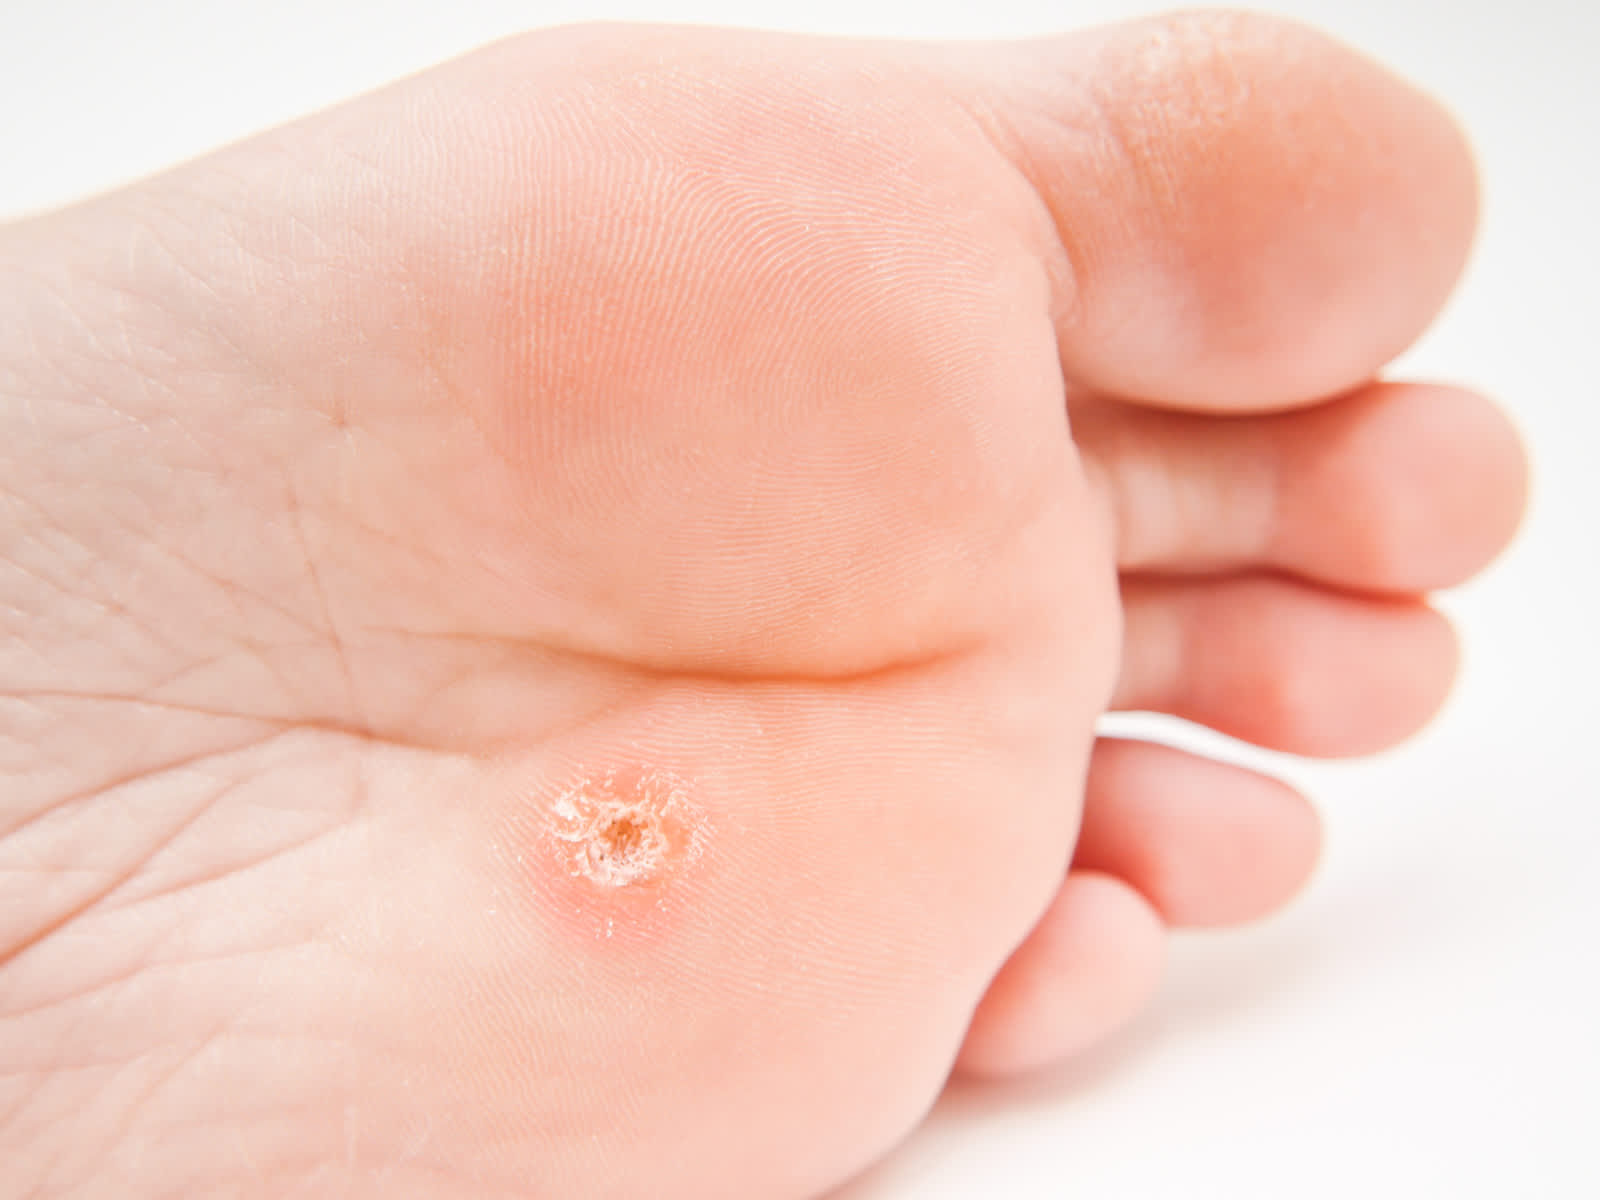 In the image, there is a sole of a foot with a wart in the middle of the forefoot.